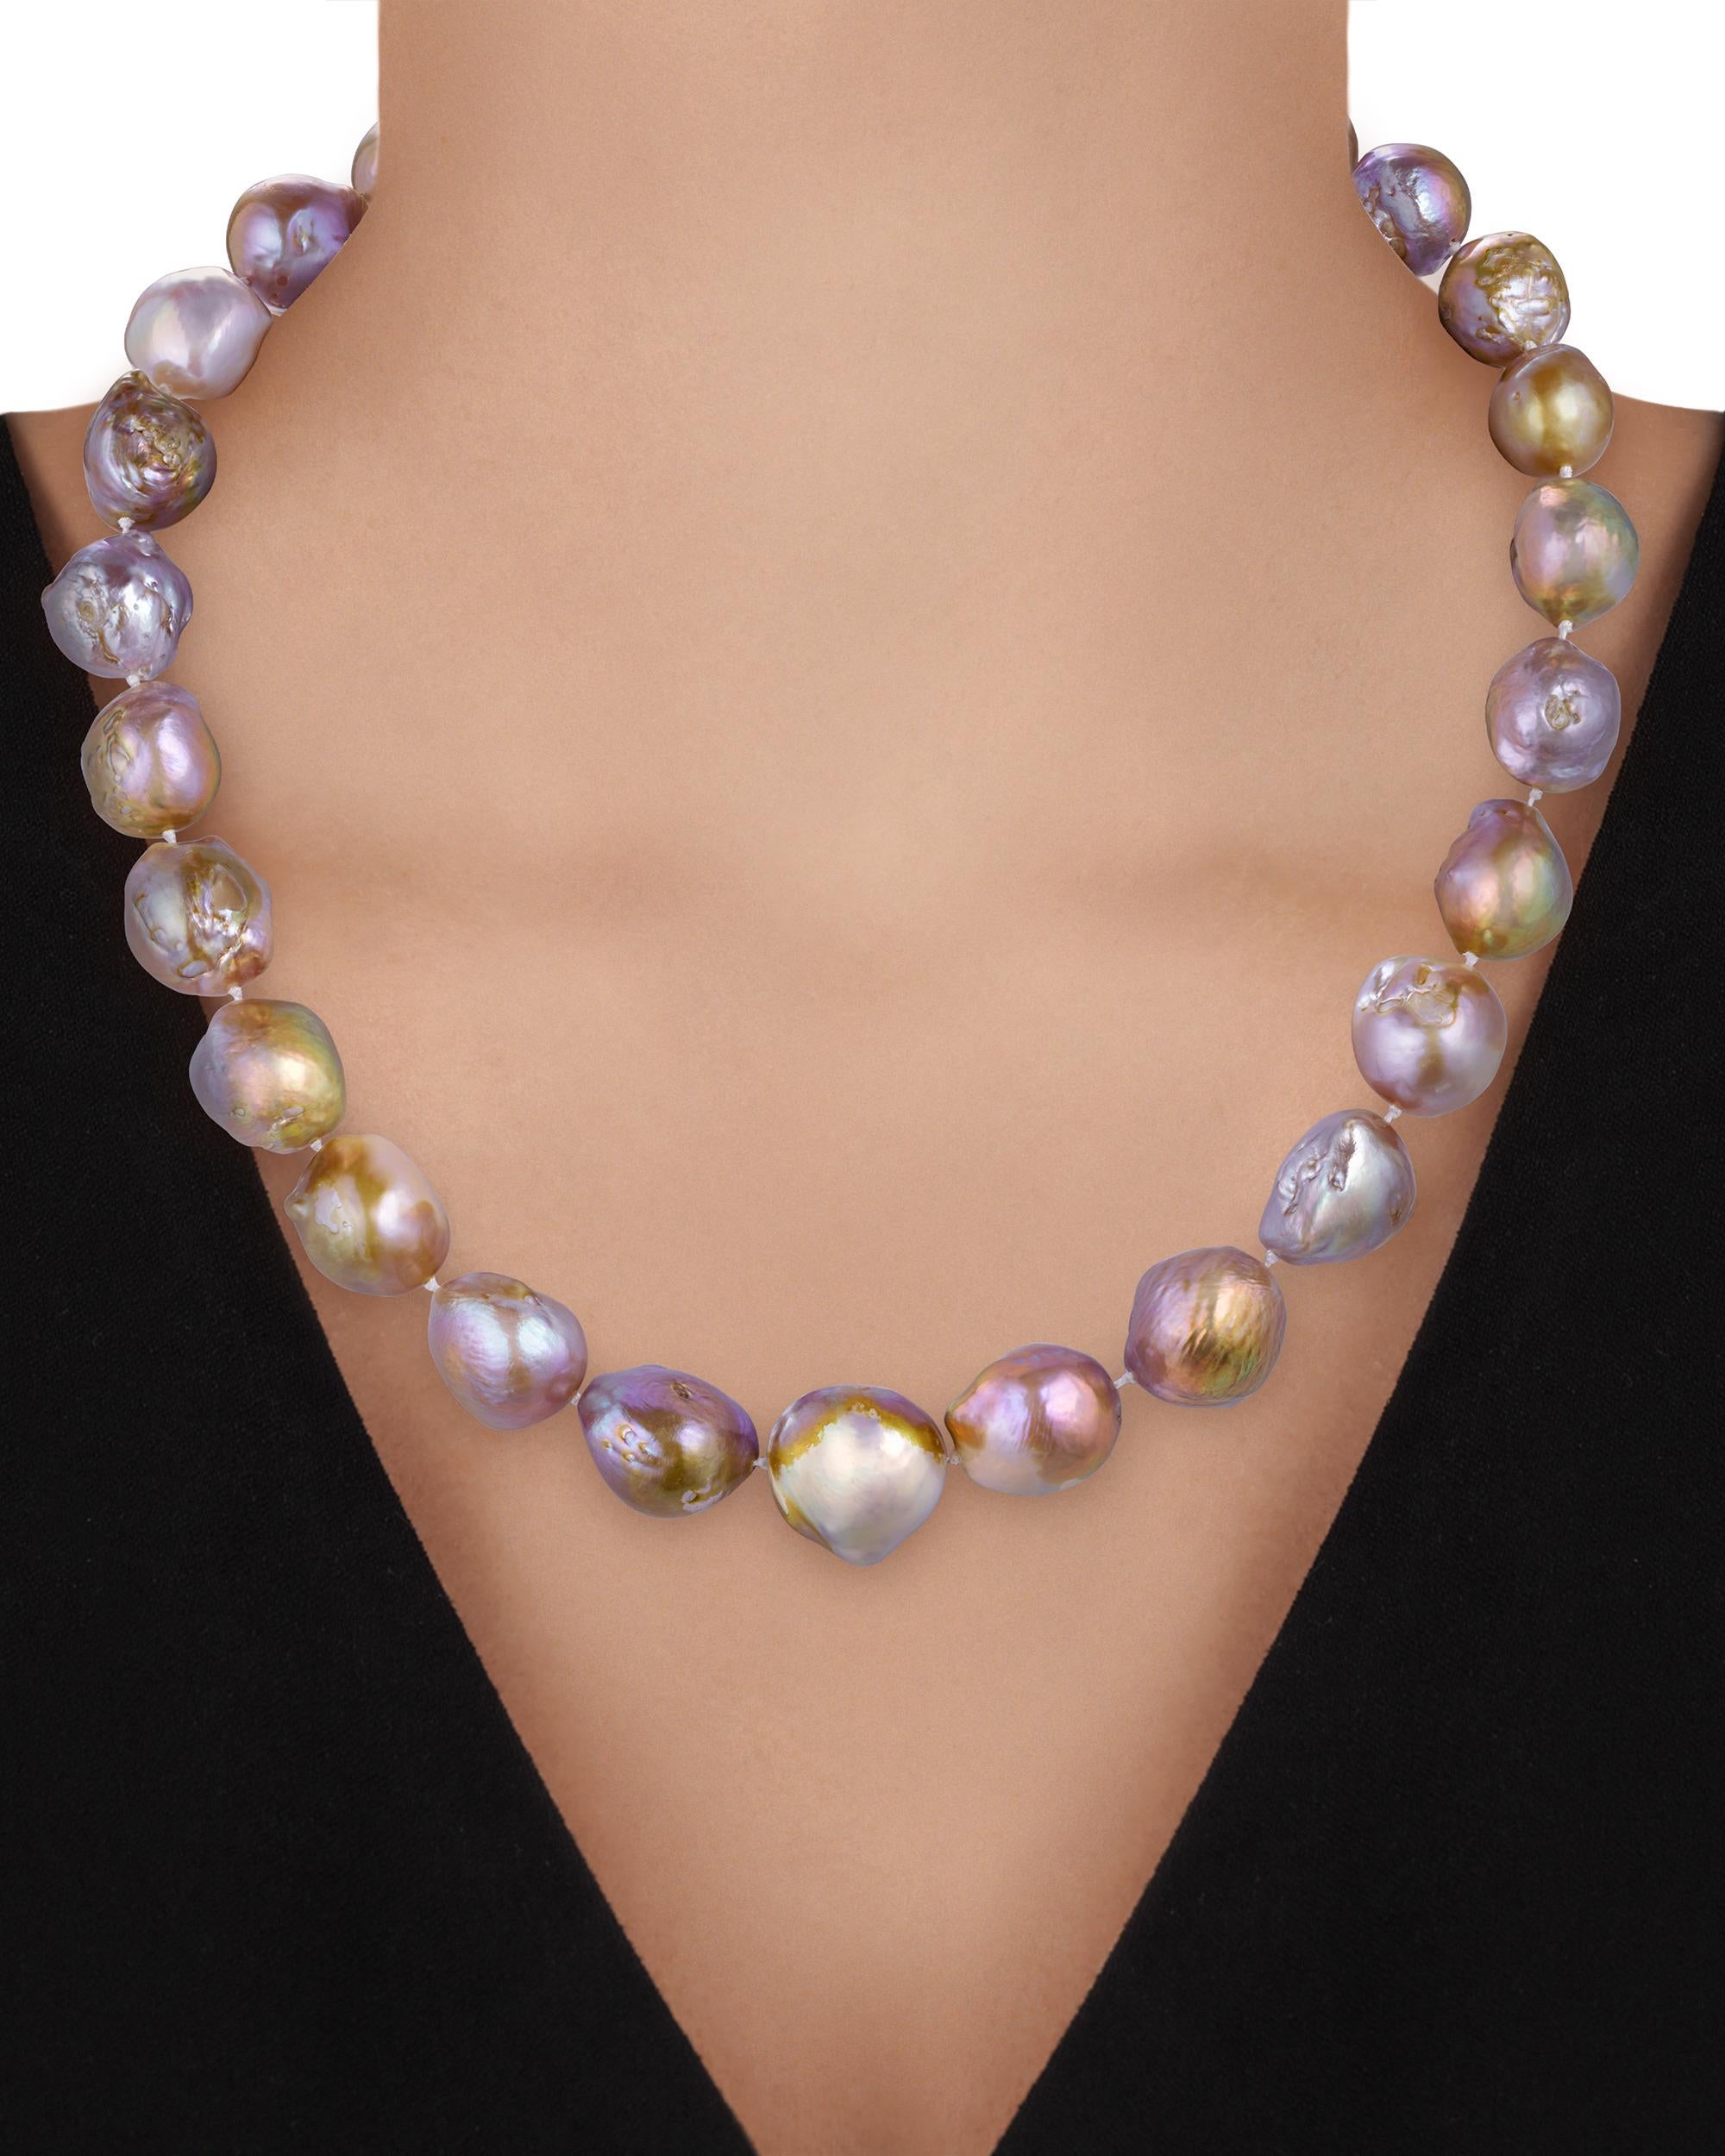 Multi-colored pearls drape gracefully around the neck in this necklace from American jewelry designer Paula Crevoshay. These iridescent, Baroque pearls are called 